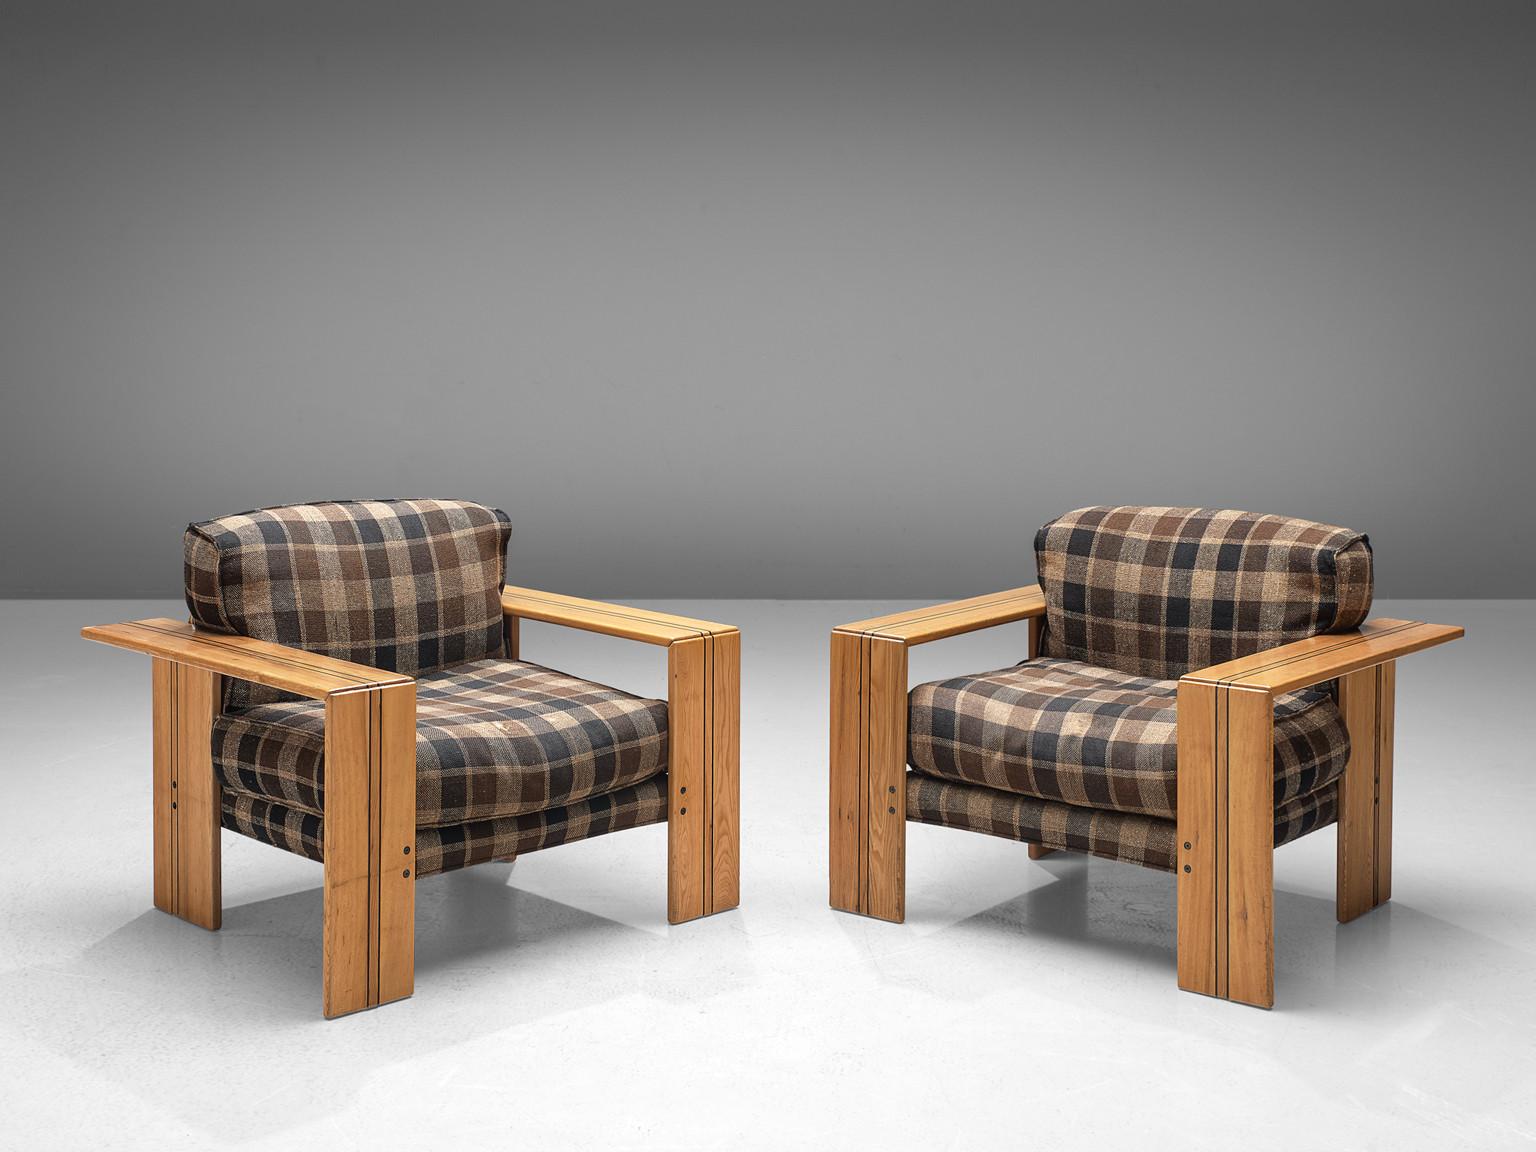 Afra & Tobia Scarpa for Maxalto, pair of two 'Artona' lounge chairs, elm, checkered fabric, Italy, 1975

Pair of cubic ‘Artona’ lounge chairs by Italian designer couple Afra and Tobia Scarpa. These chairs show absolute stunning craftsmanship.